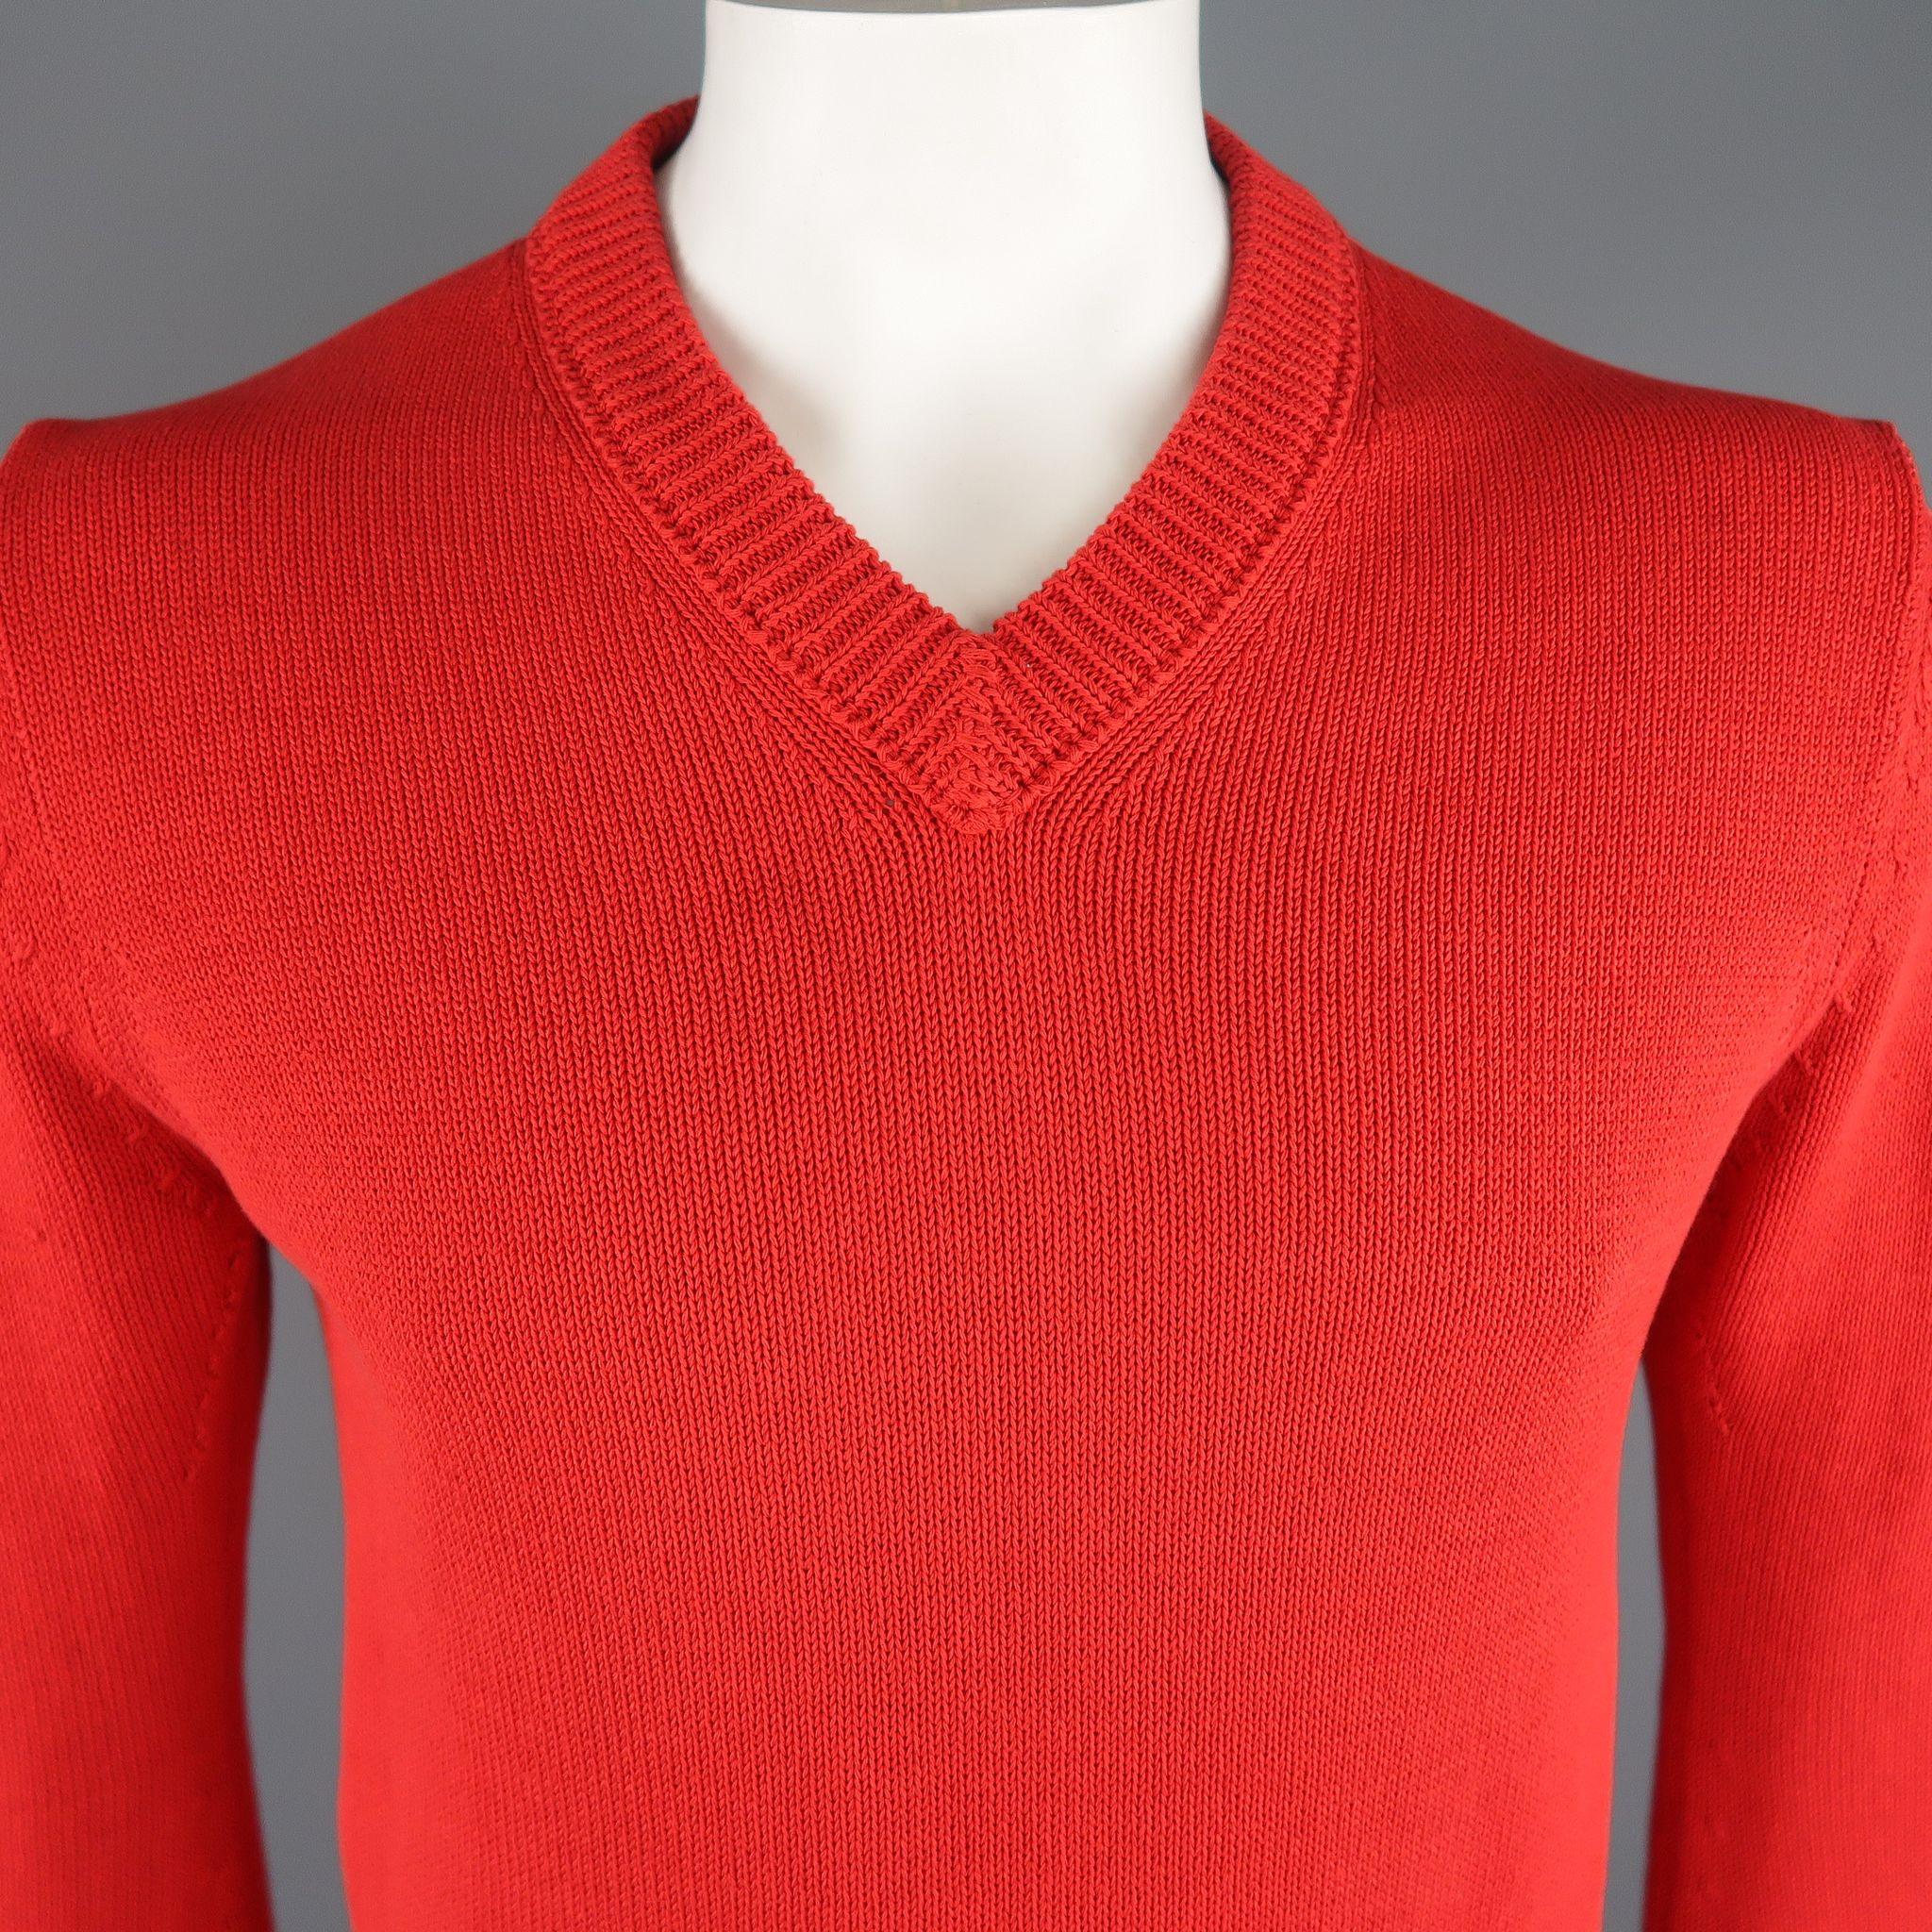 JIL SANDER pullover sweater comes in a vibrant  tone of red in knitted cotton material, with a detailed V-neck and ribbed cuffs and hem. Very light stain and fading. Made in Italy.
 
Good Pre-Owned Condition.
Marked: 50
 
Measurements:
 
Shoulder: